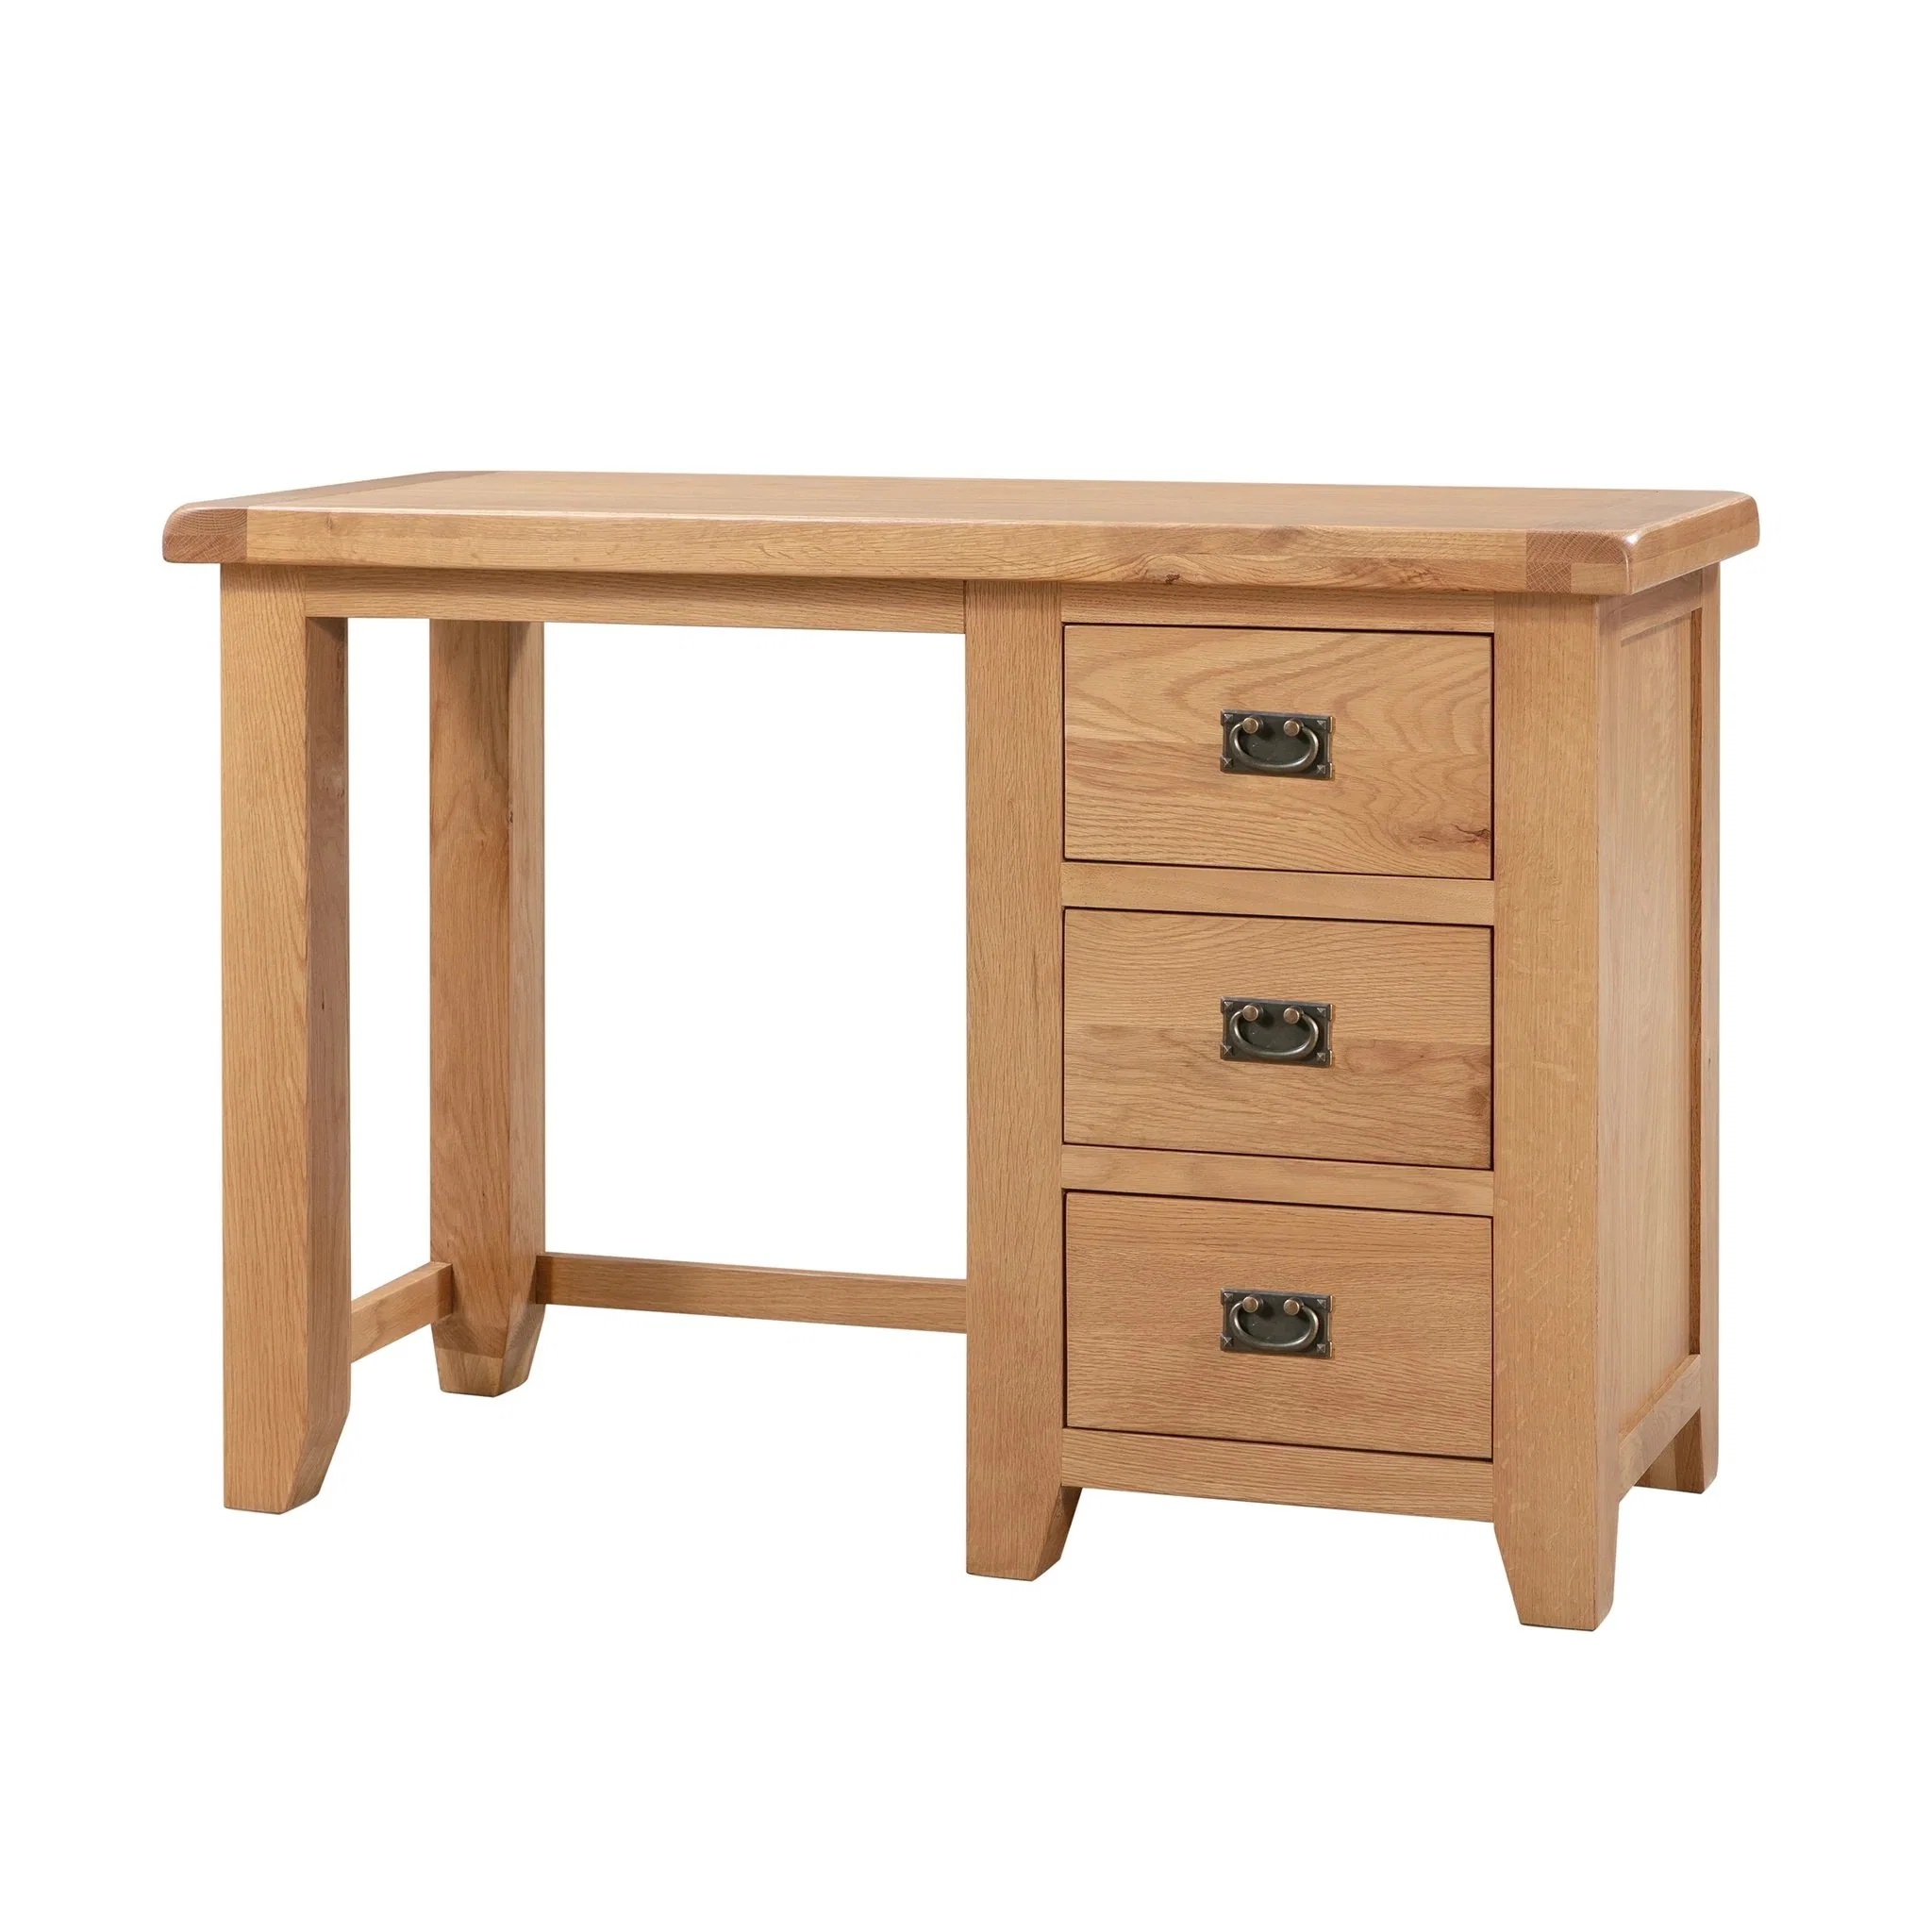 Chinese Manufacture Hot Sell White Oak Office Desk Home Furniture Office Computer Desk Office Table with Drawers